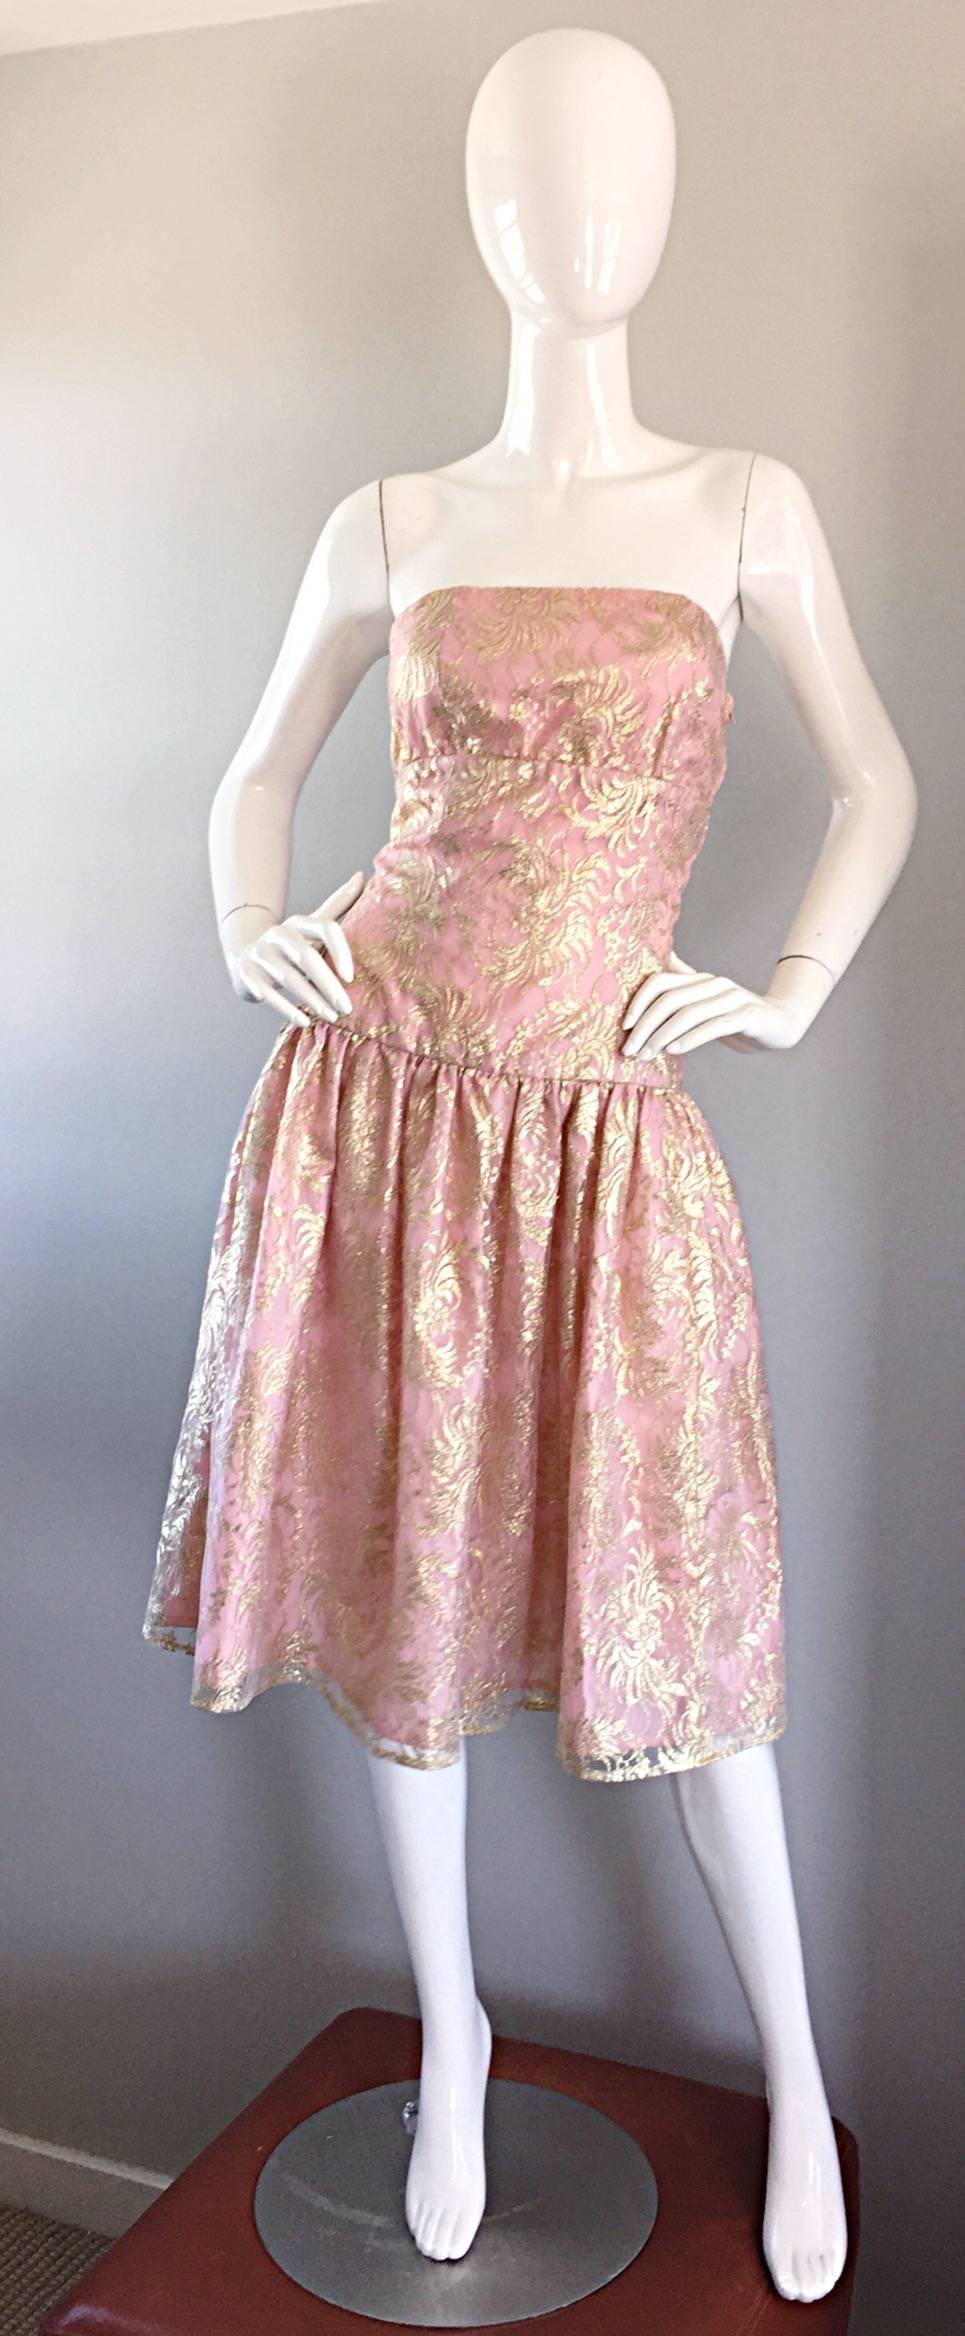 Prettiest vintage Halston strapless cocktail dress! Vibrant light pink, with an overlay of gold metallic lace. Slight drop waist, with a full skirt (could easily put a crinoline/petticoat under for a fuller skirt). Hidden zipper up the side, with